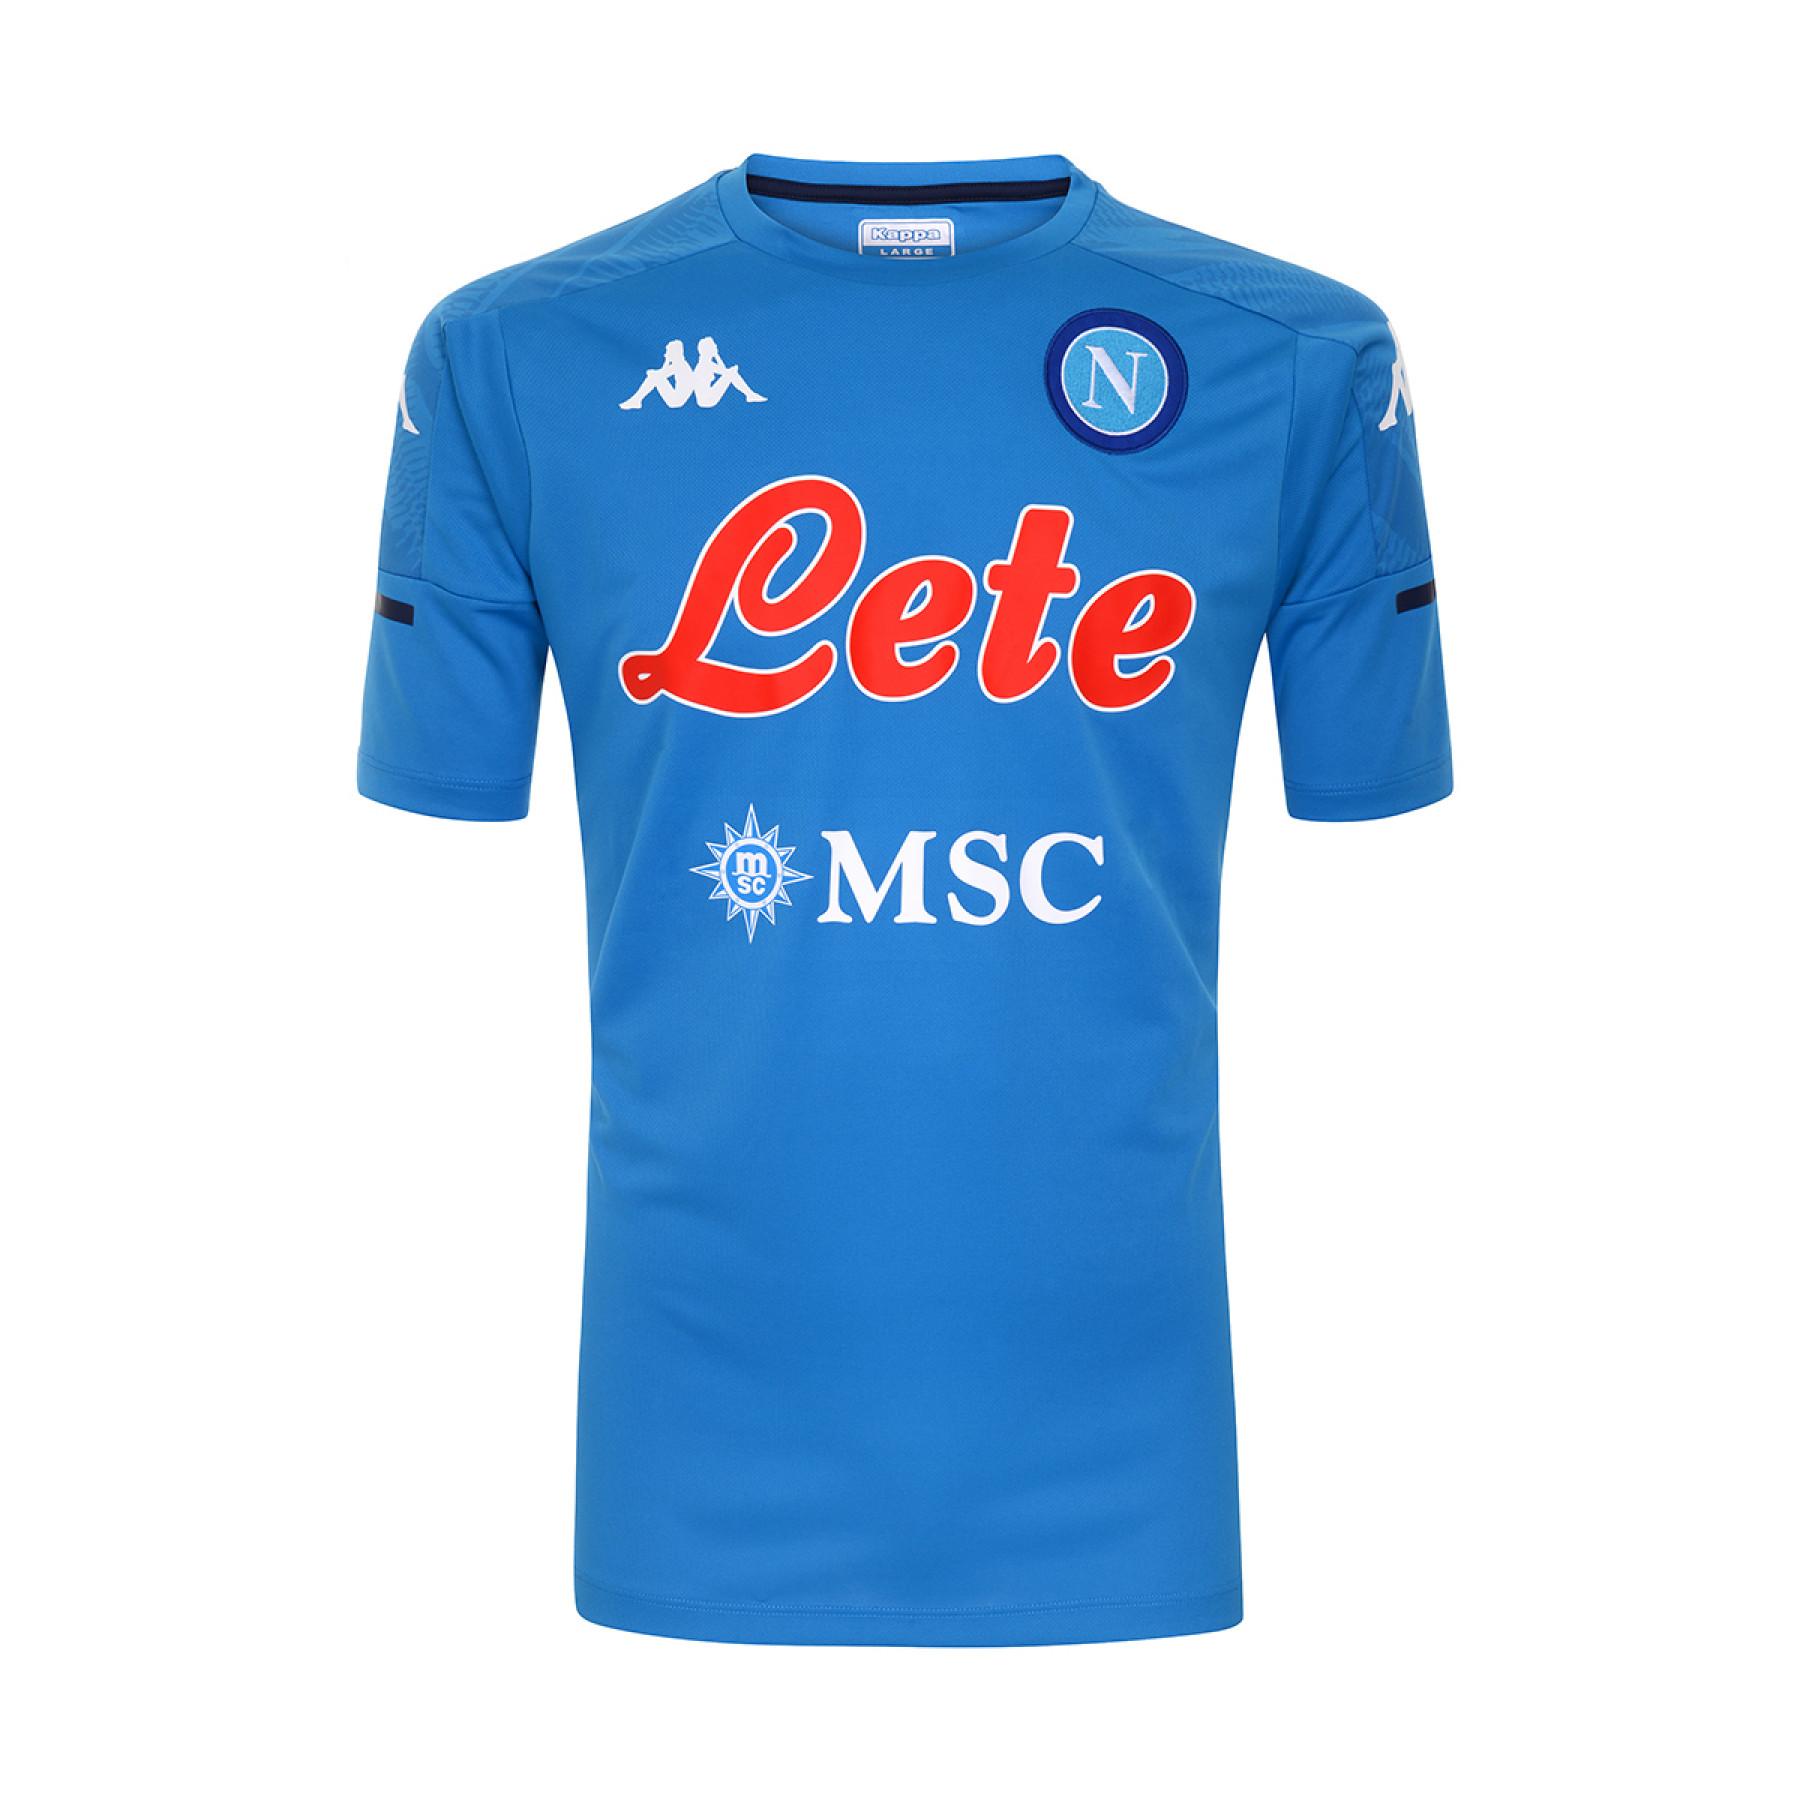 Kinder-Trainings-T-Shirt SSC Napoli 2020/21 abouo 4